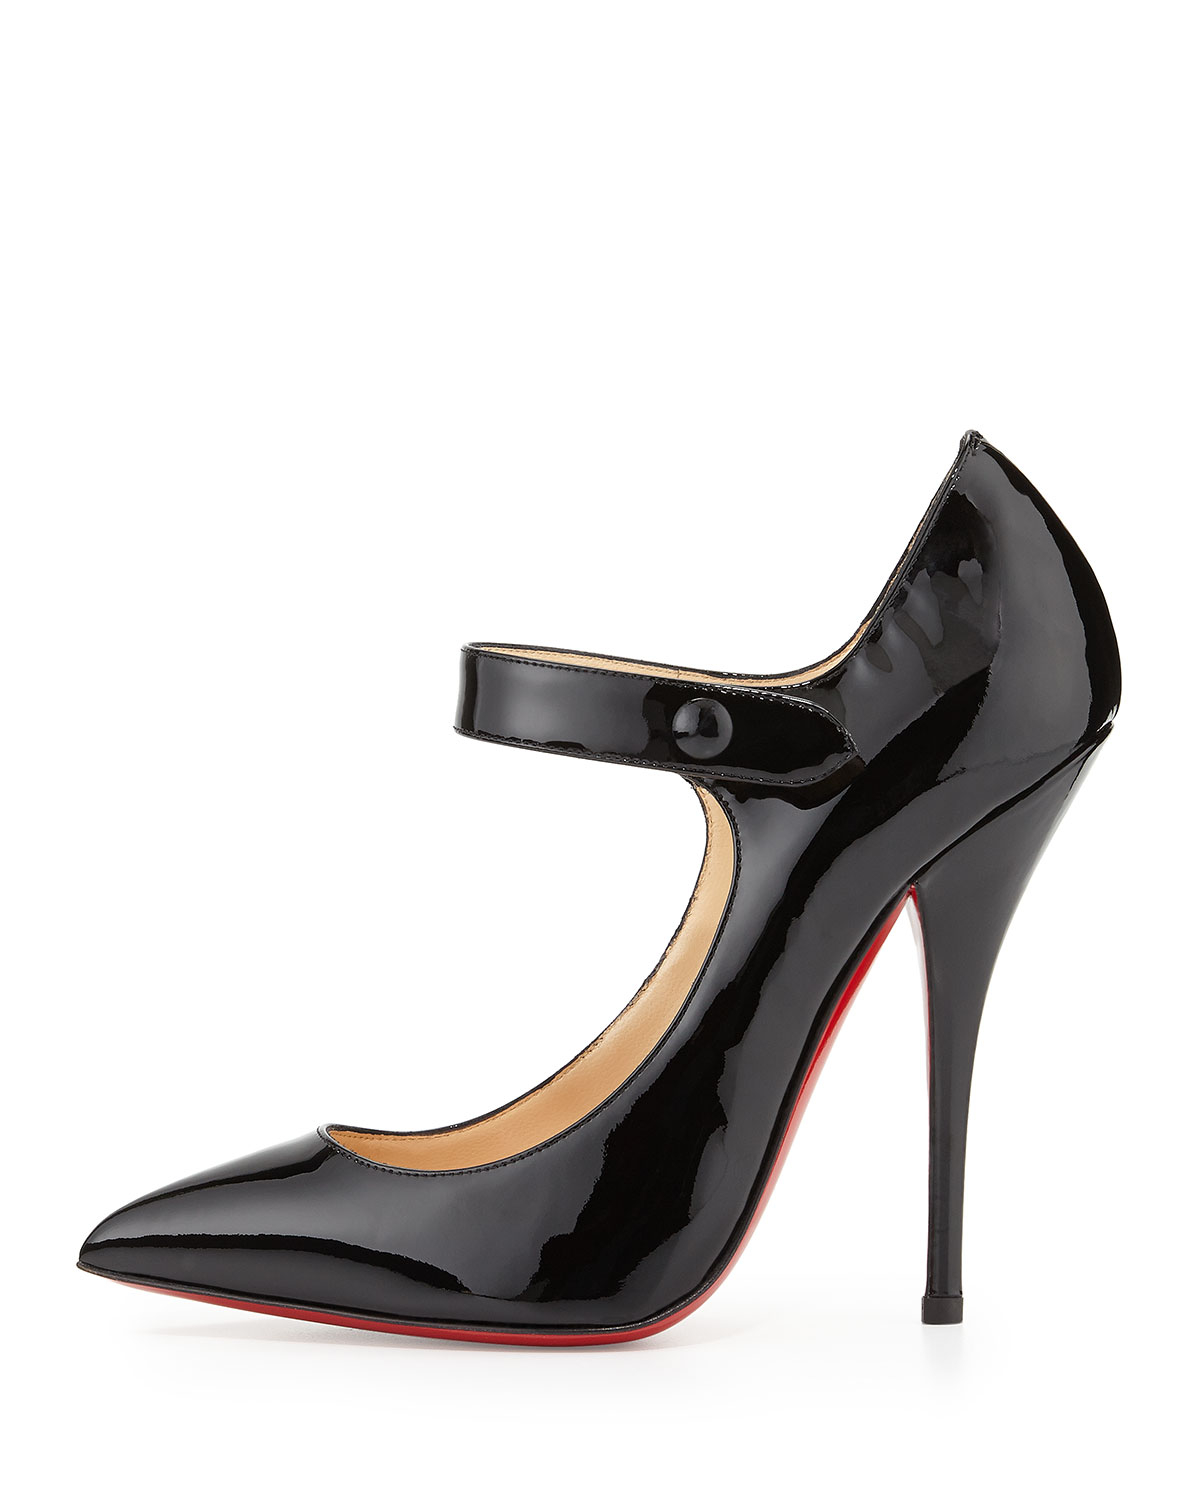 christian louboutin neo pensee mary jane red sole pump black